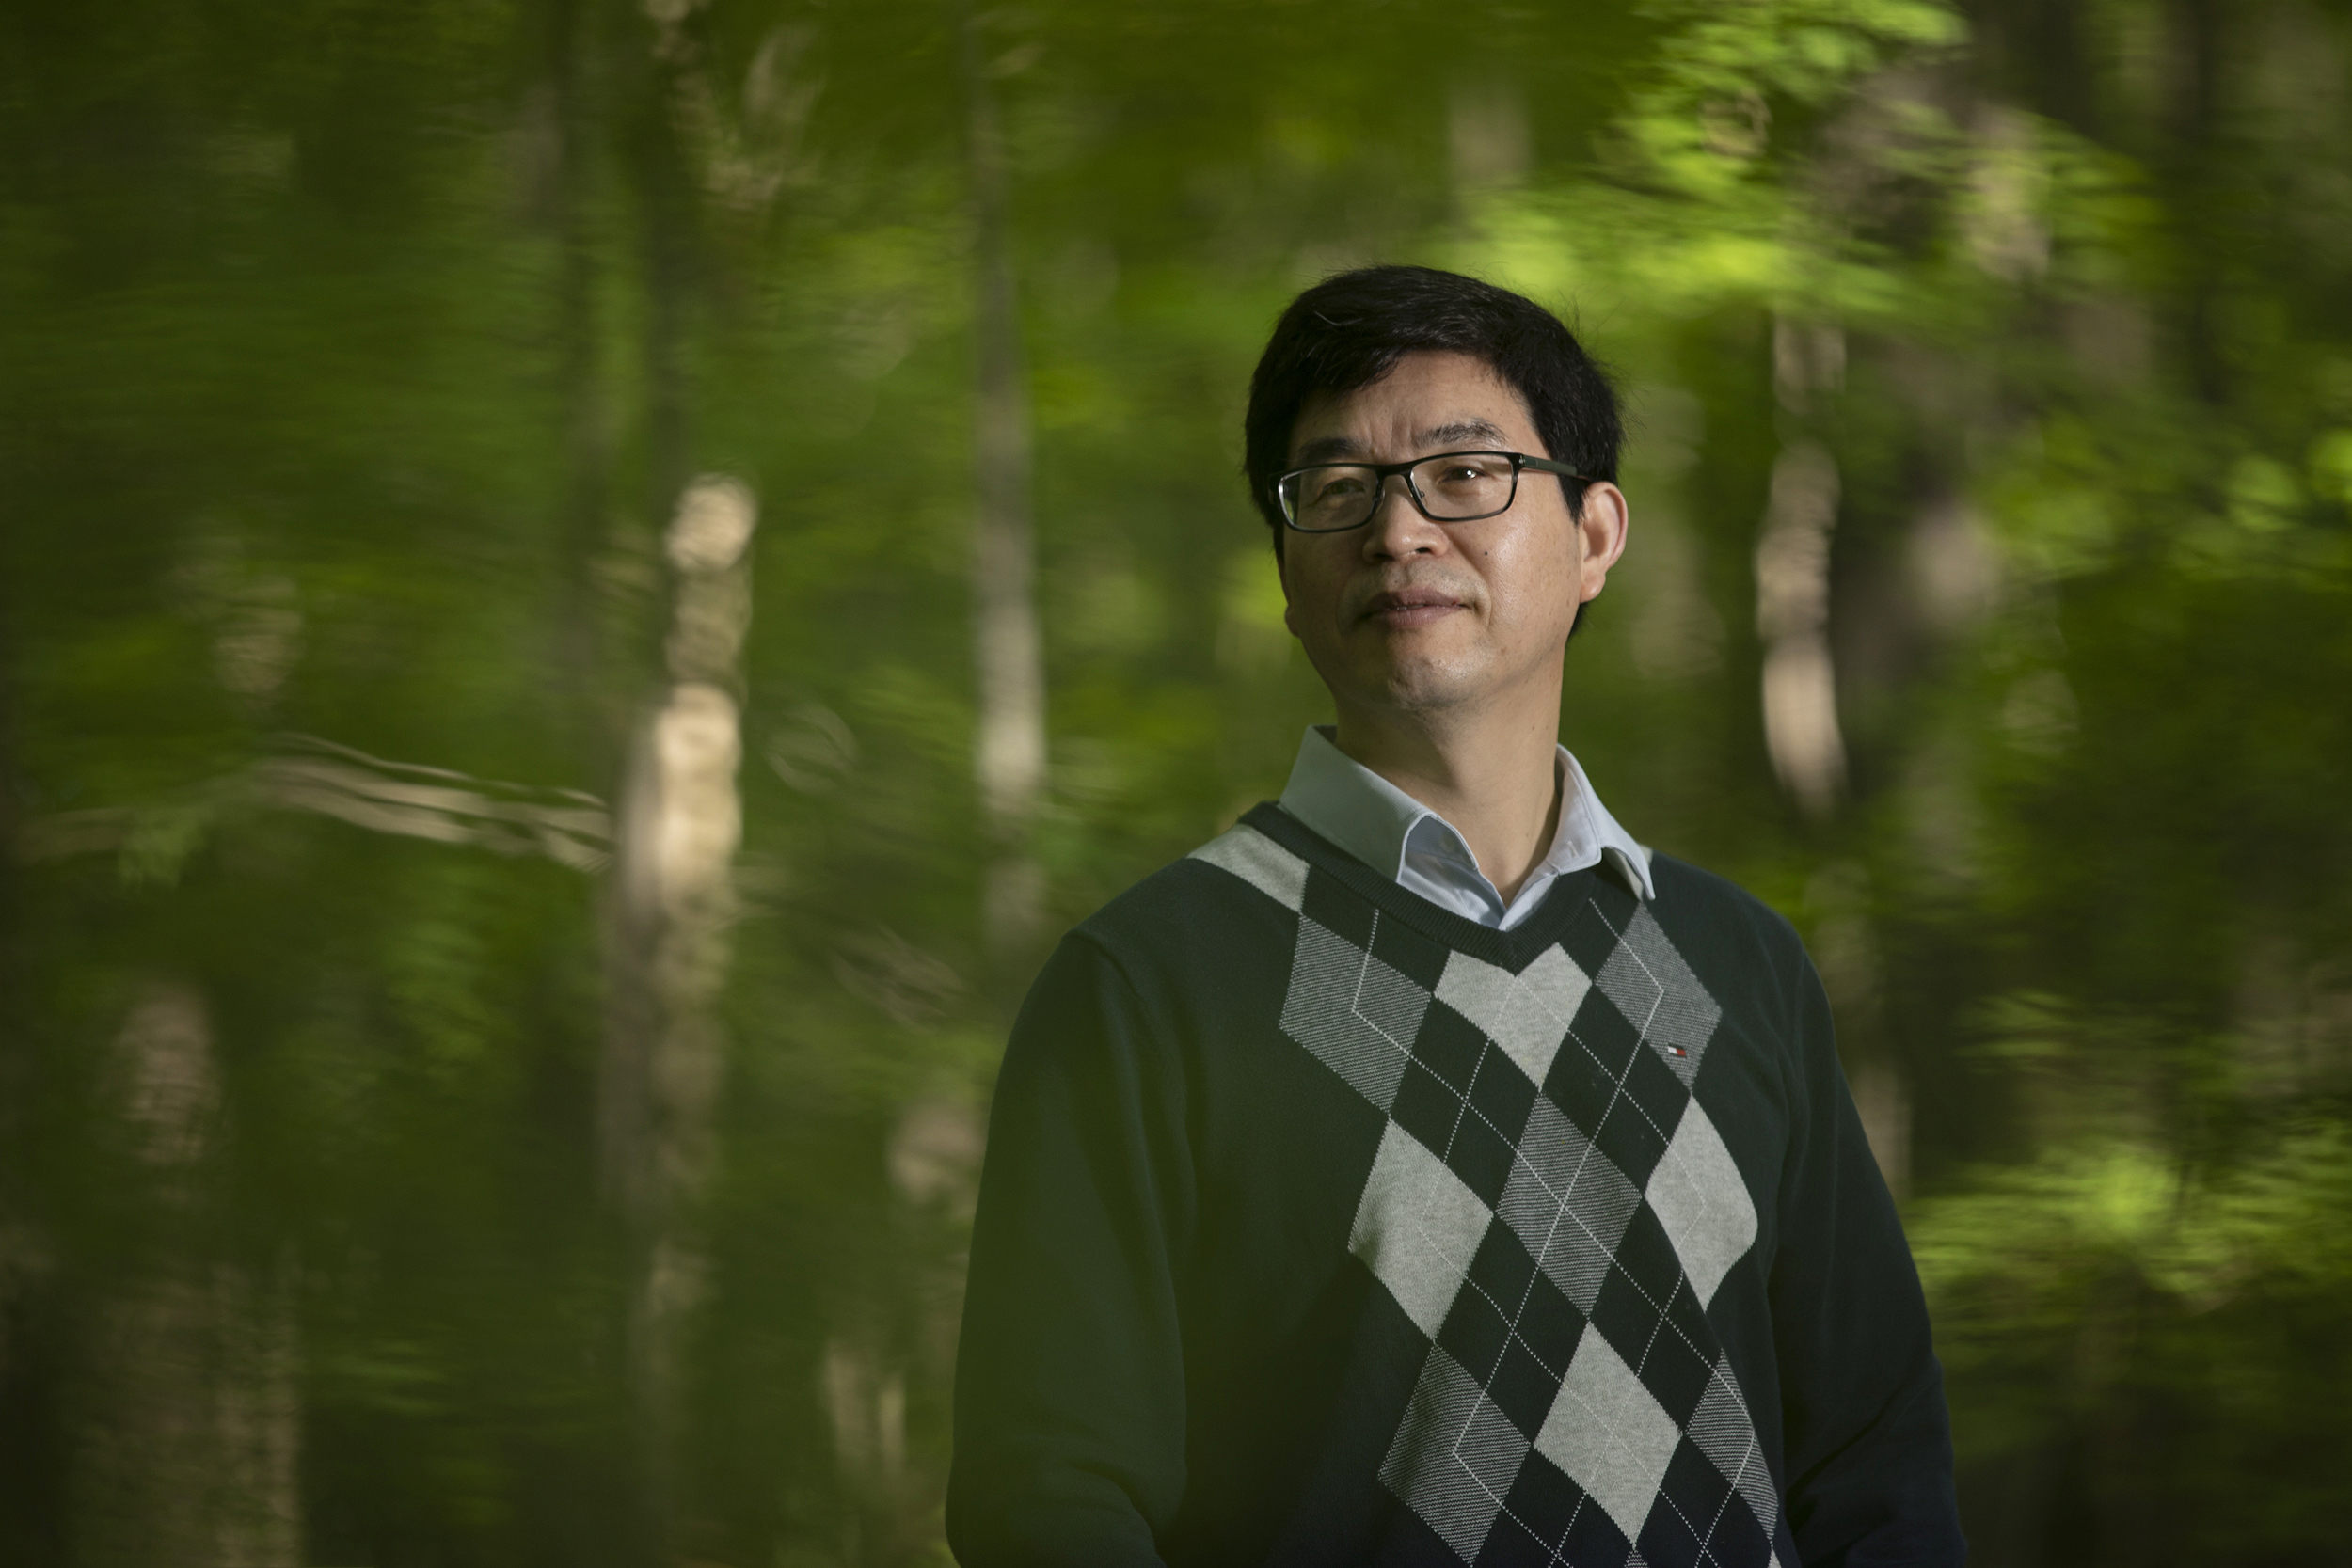 Conghe Song studies the relationship between land use, change in vegetation, and climate change -- and social impacts of environmental programs.